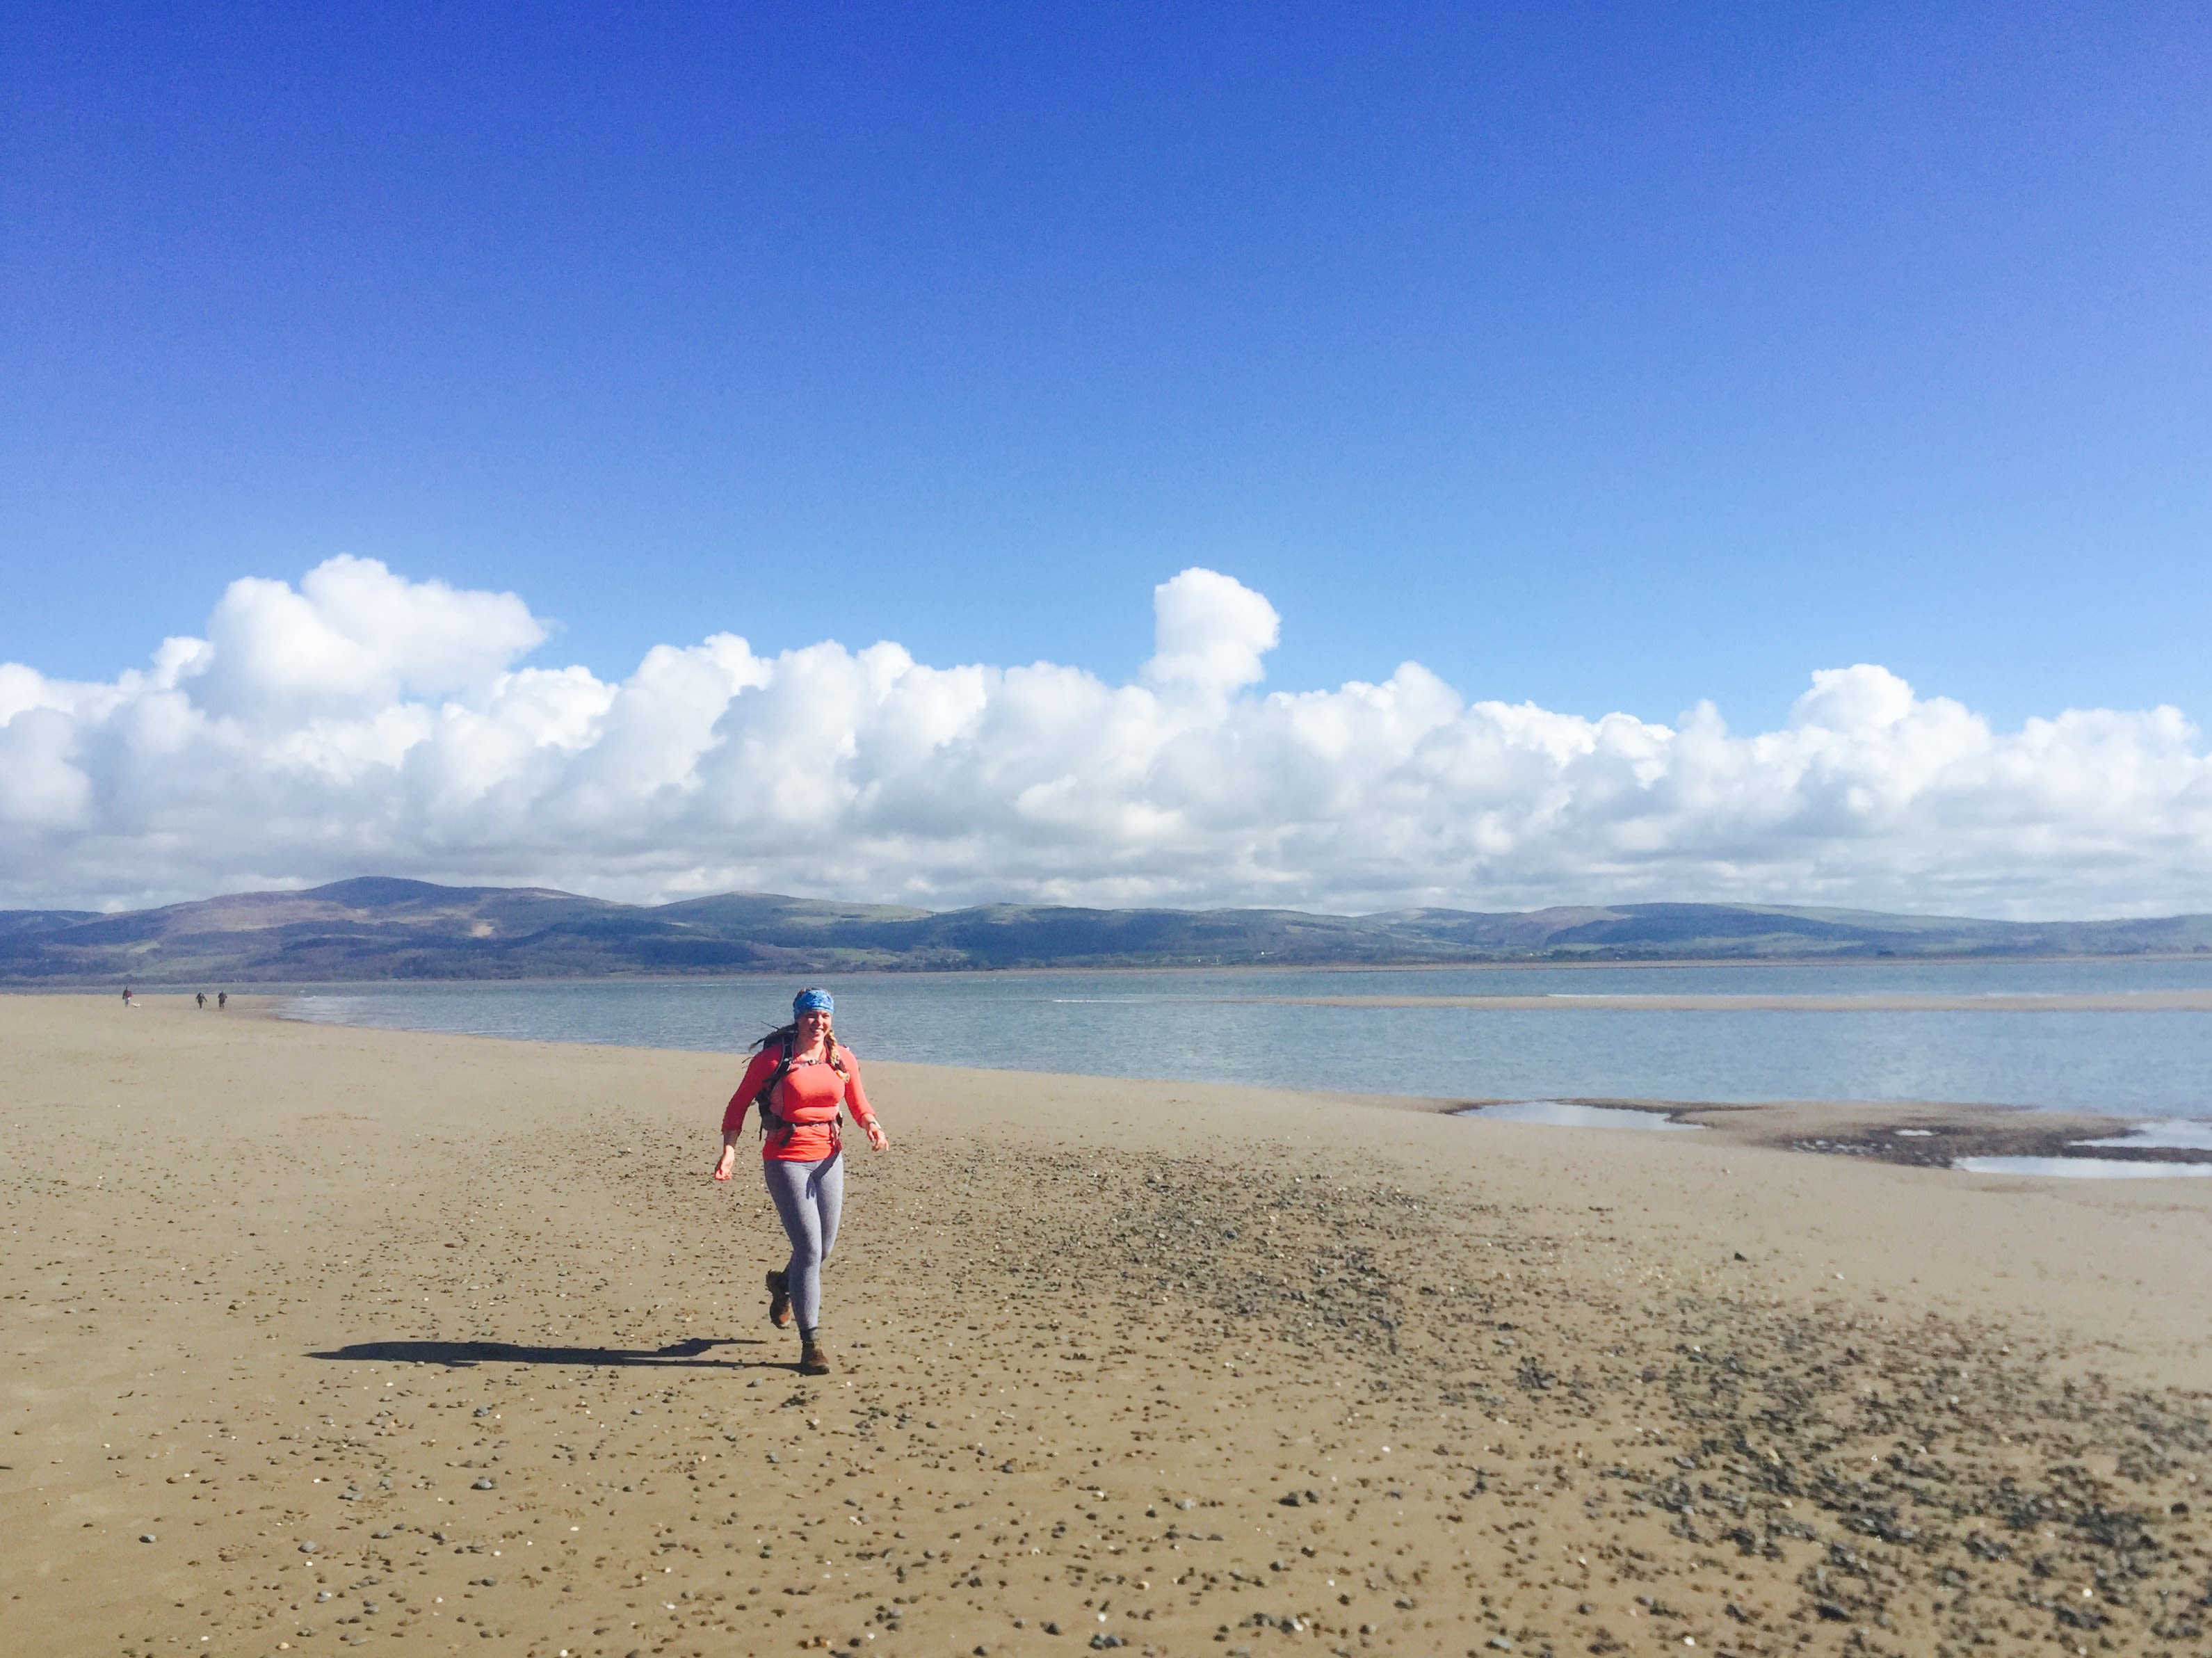 Elise Downing on the Wales Coast Path running on the beach in an orange top with a backpack underneath bright blue skies.